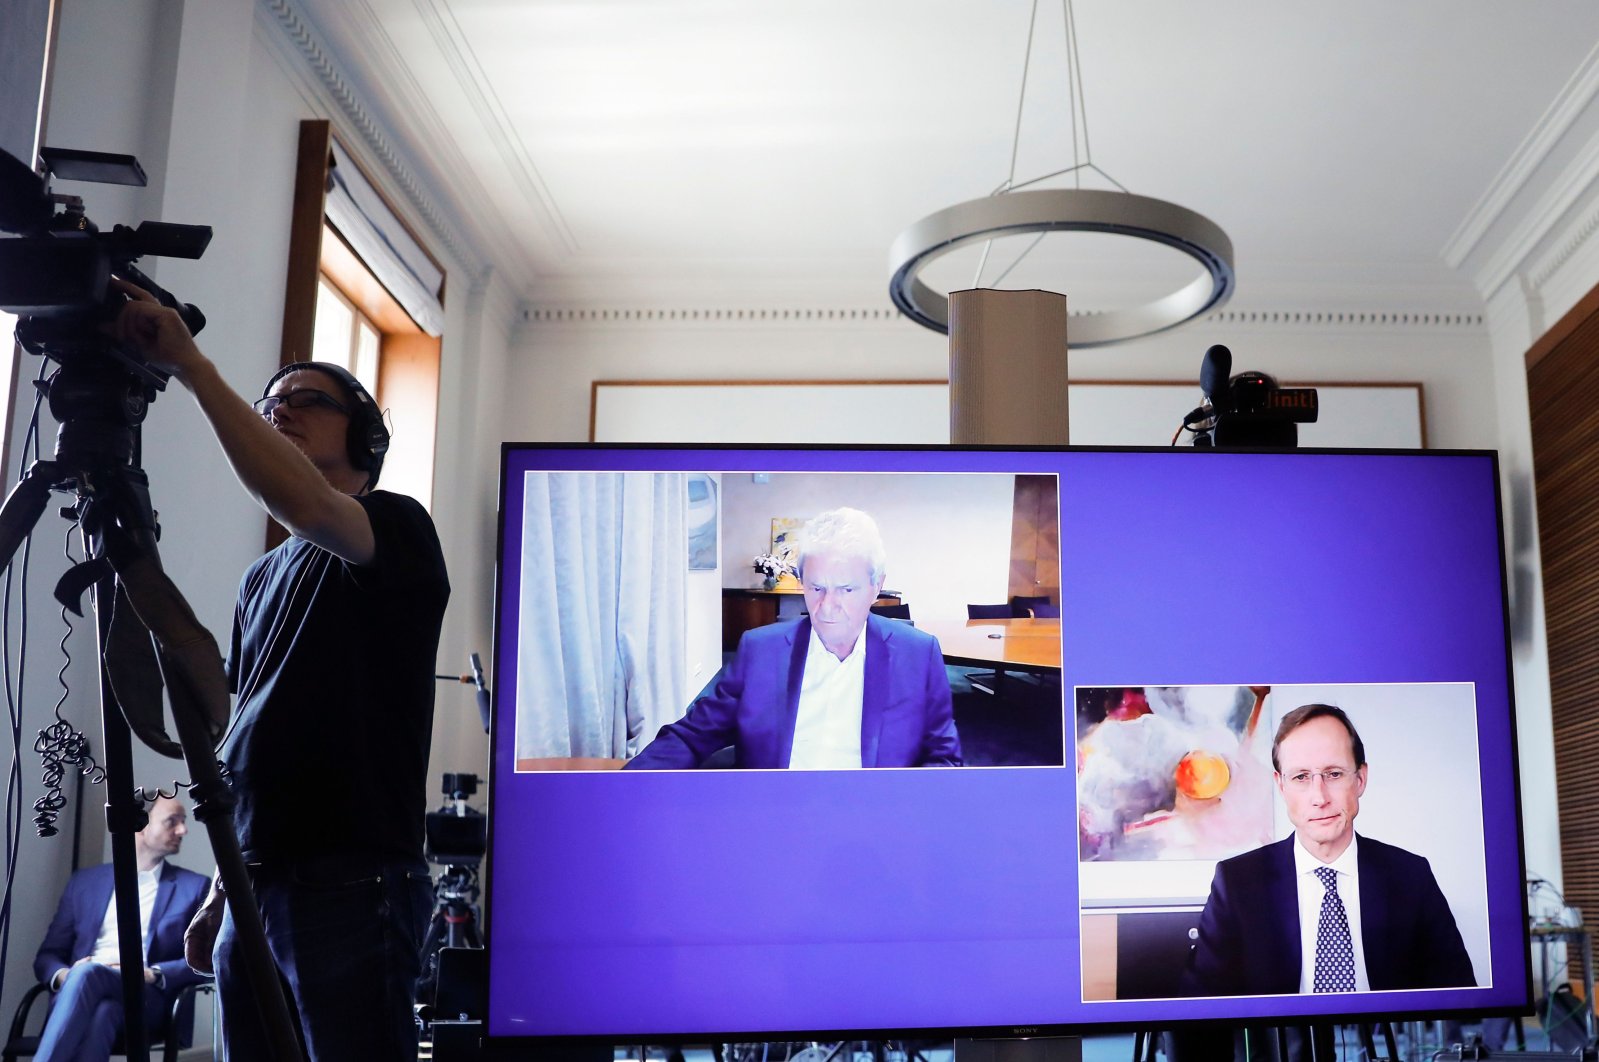 CureVac main shareholder Dietmar Hopp (L) and CureVac CEO Franz-Werner Haas are displayed on a screen during a news conference at the economy ministry in Berlin, Germany, June 15, 2020. (AFP Photo)